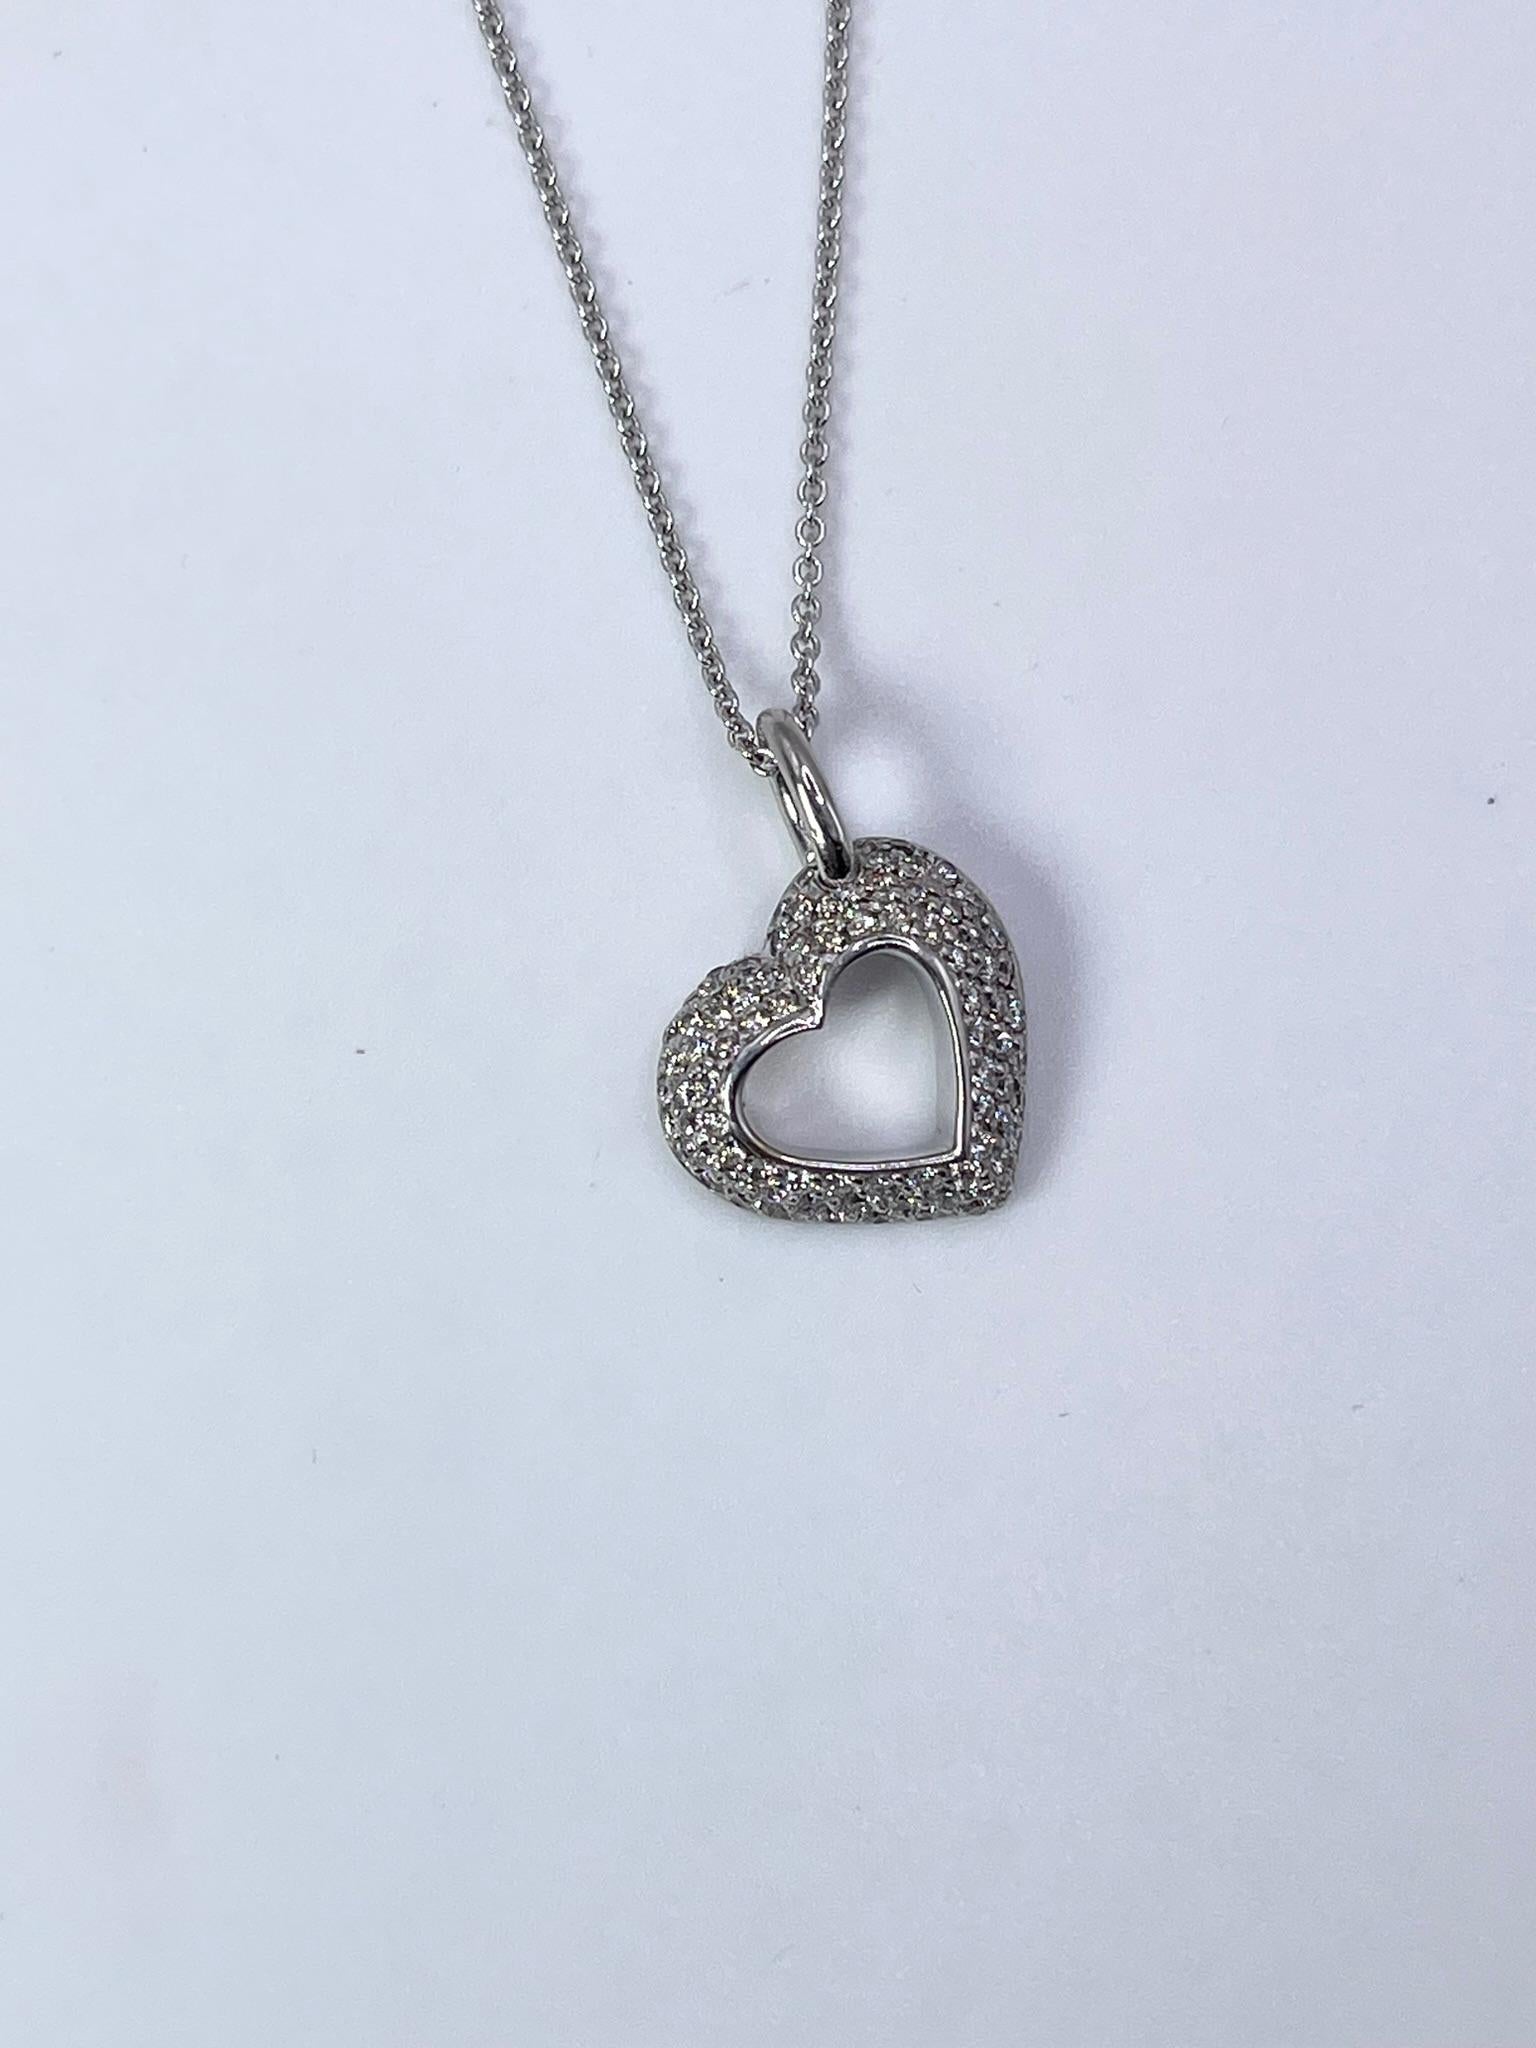 Heart diamond pendant necklace in 14KT white gold, diamonds are set with pave setting style.

GRAM WEIGHT: 6.29gr
GOLD: 14KT white gold
NECKLACE chain-18